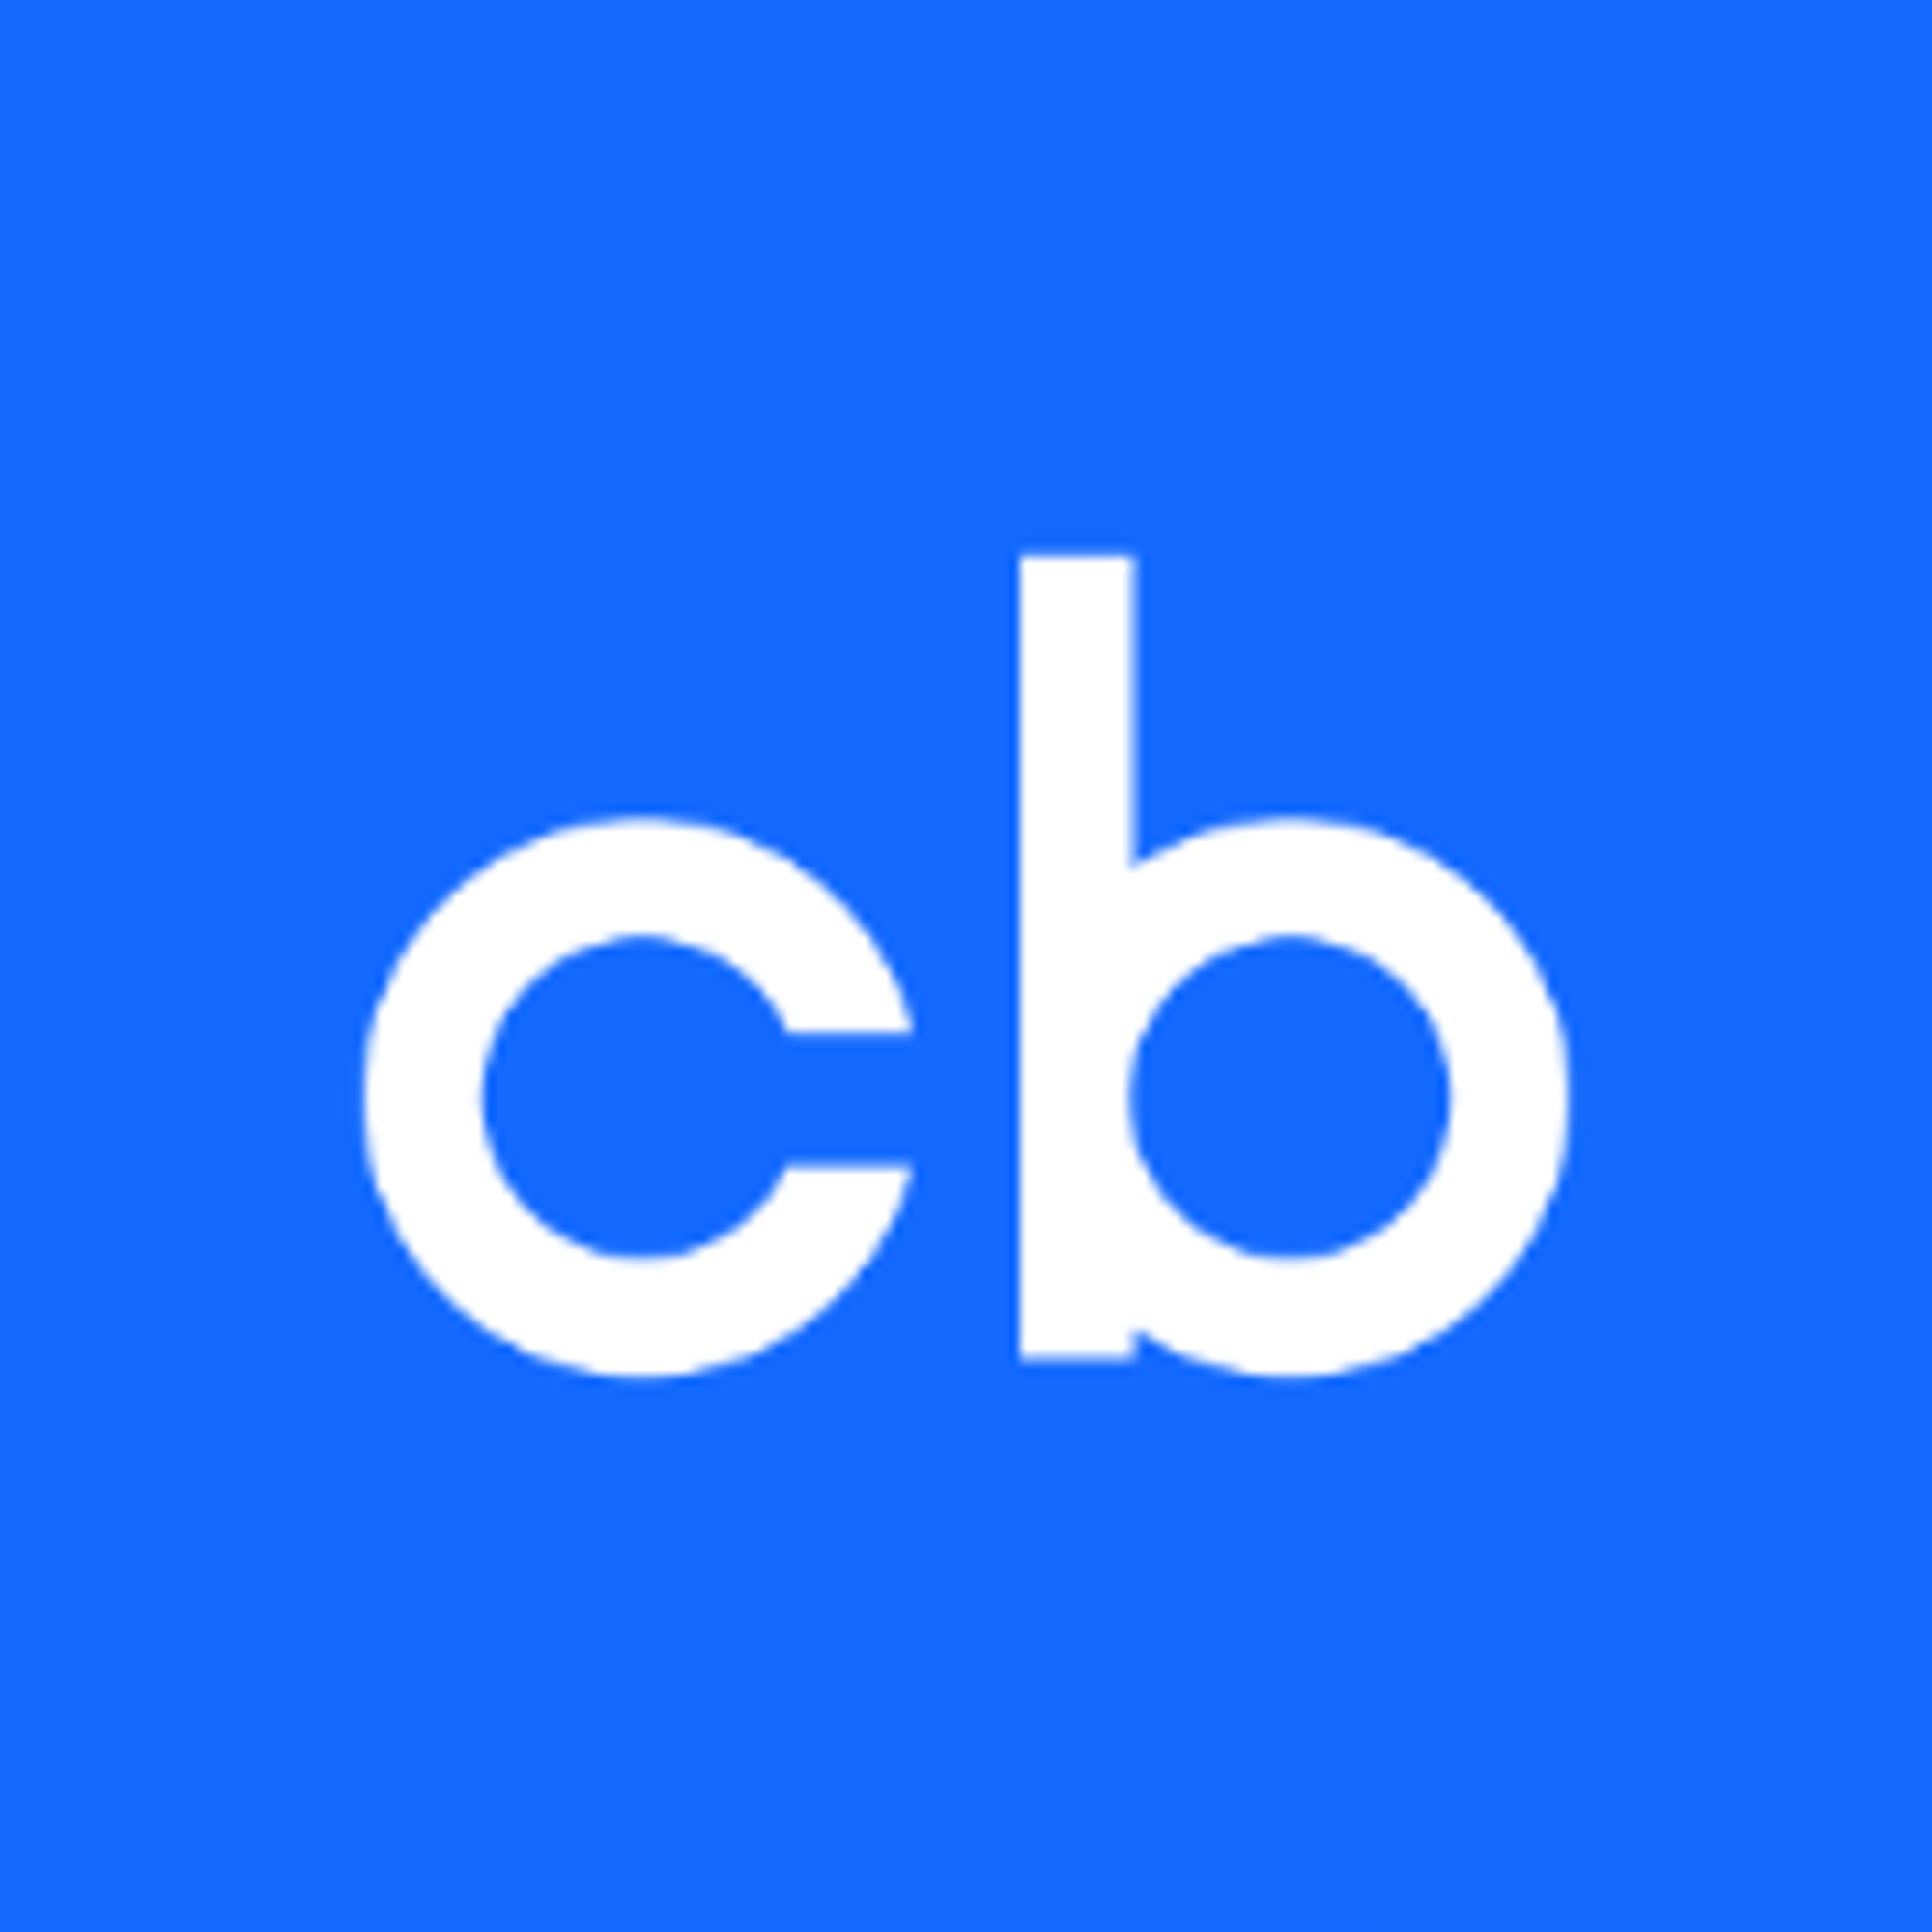 Crunchbase: Discover innovative companies and the people behind them